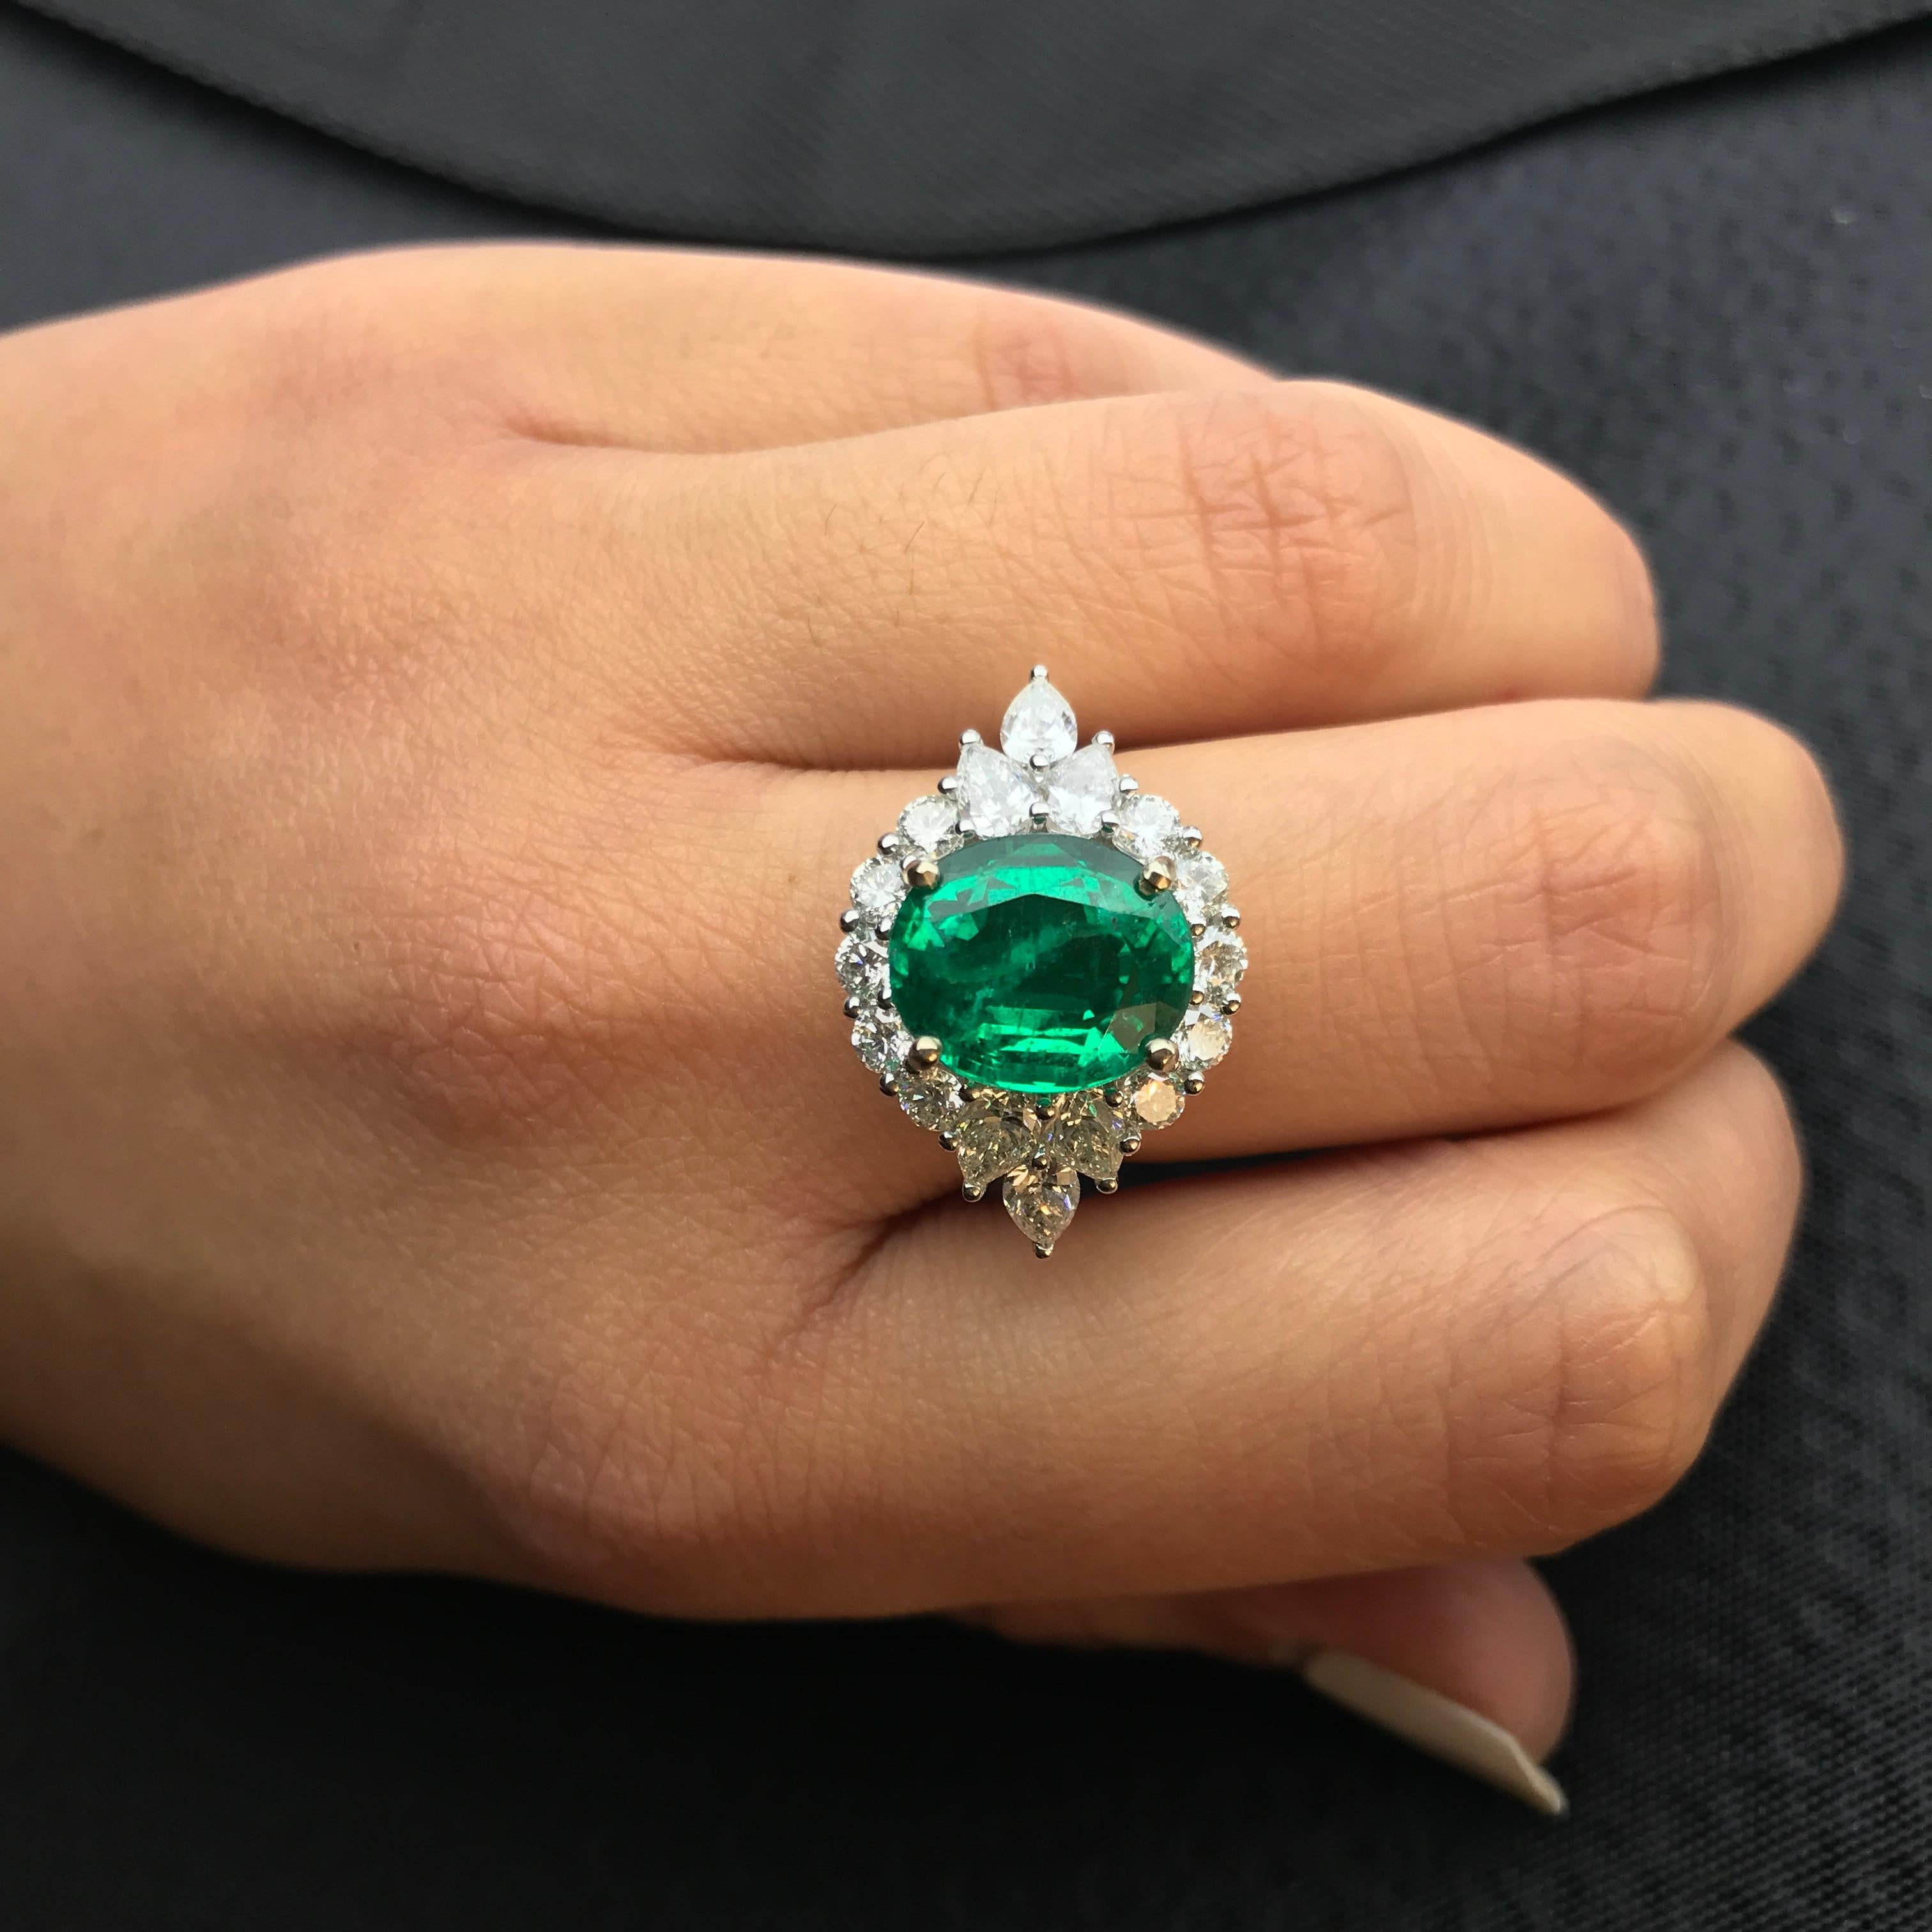 Oval Cut 4.85 Carat Emerald and Diamond Cocktail Ring